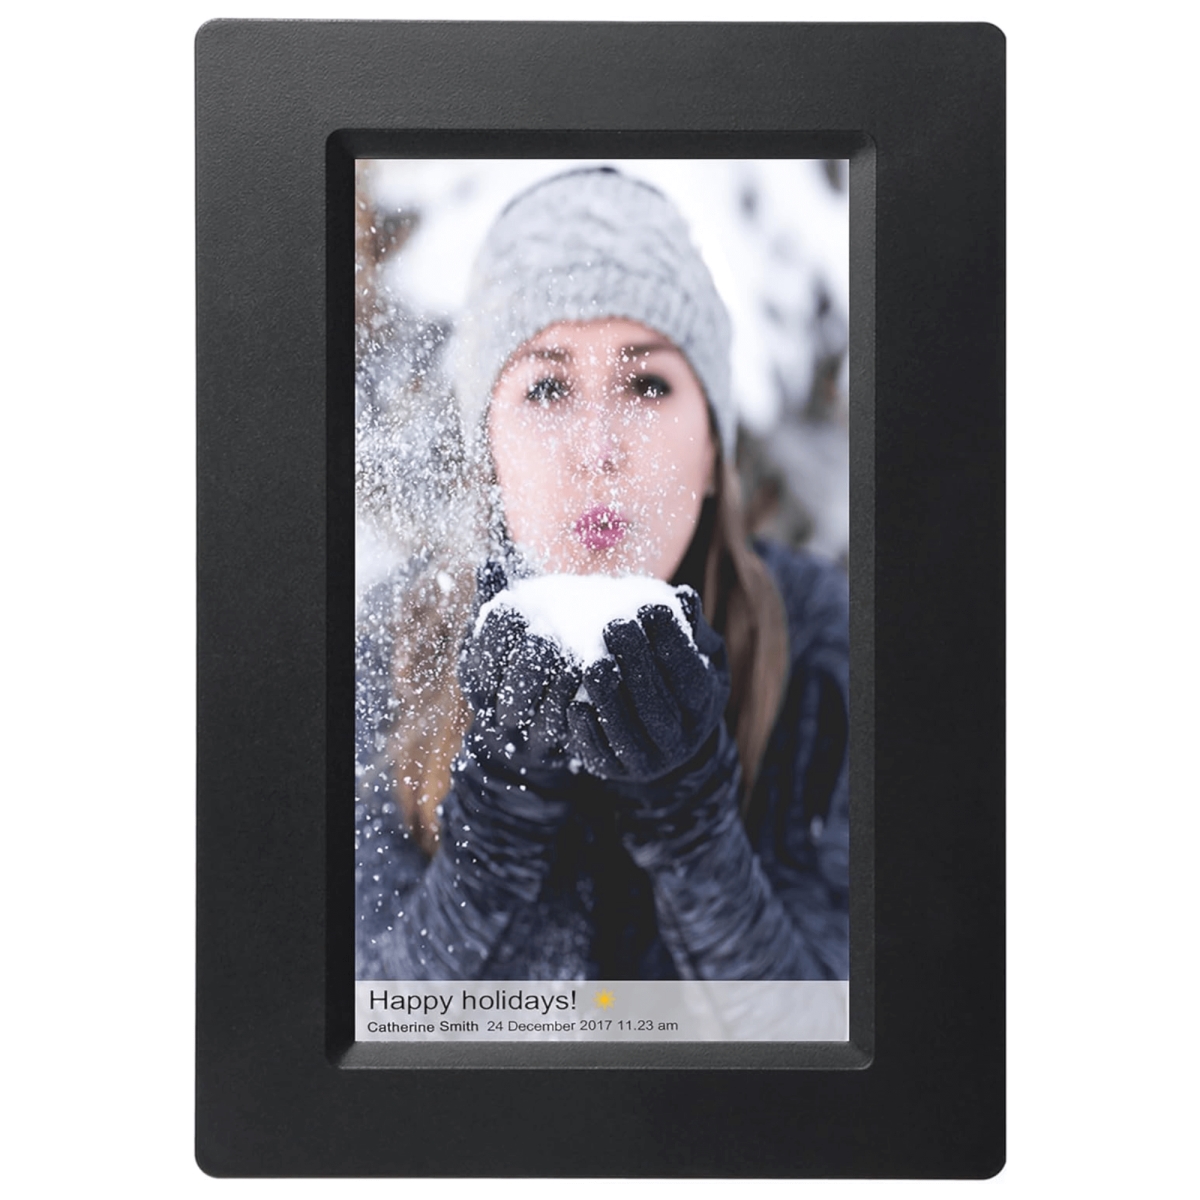 Picture of Supersonic SC-7107W Supersonic 7&apos; Smart WiFi Photo Frame with Built-In Memory